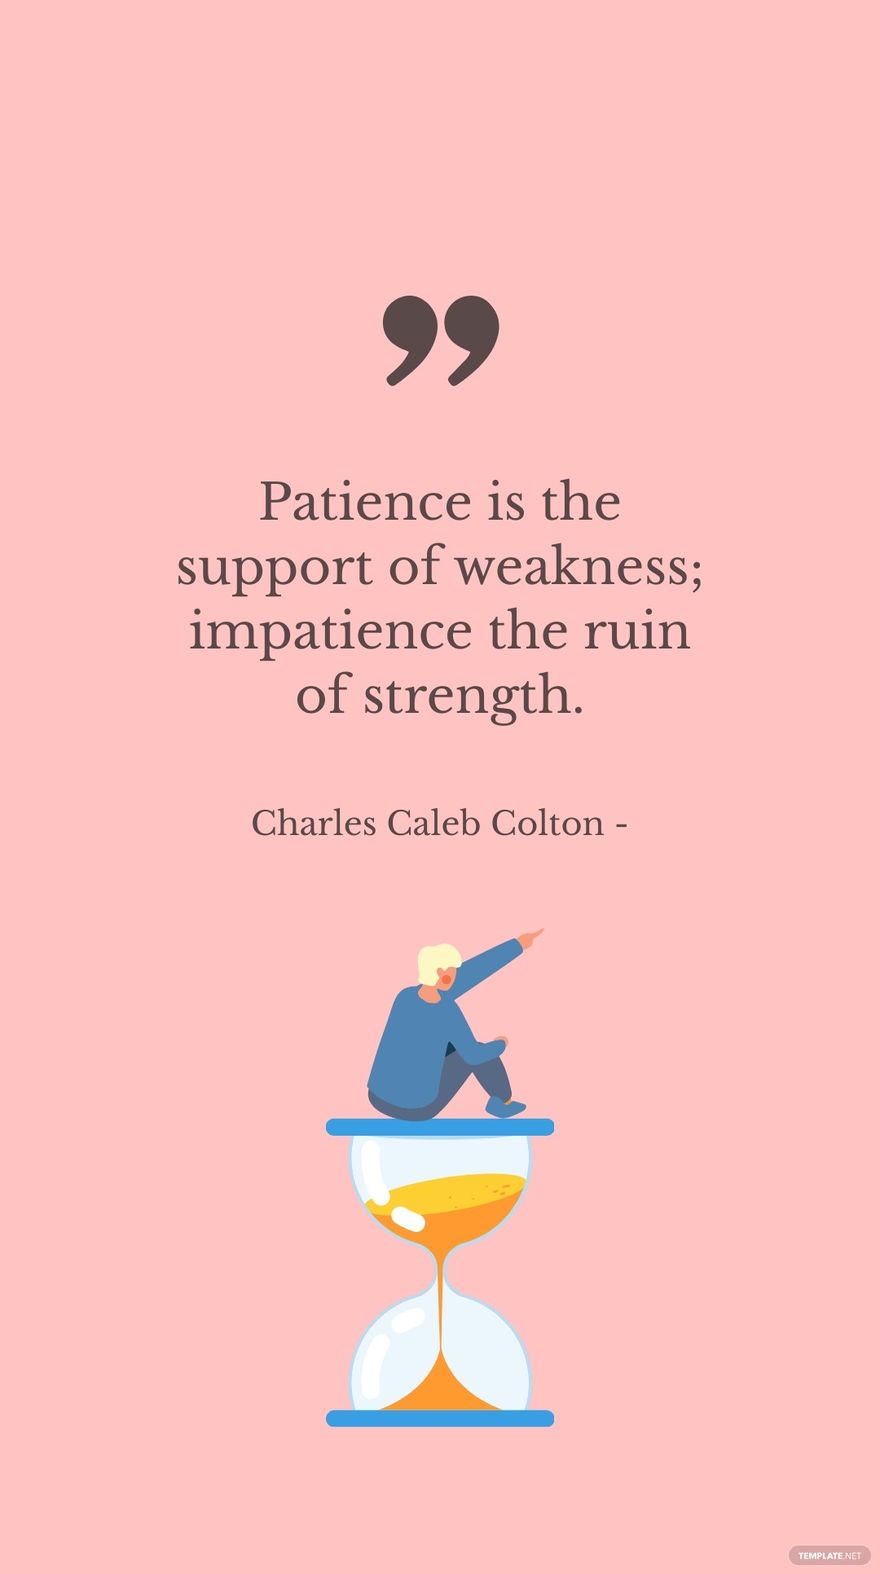 Charles Caleb Colton - Patience is the support of weakness; impatience the ruin of strength.